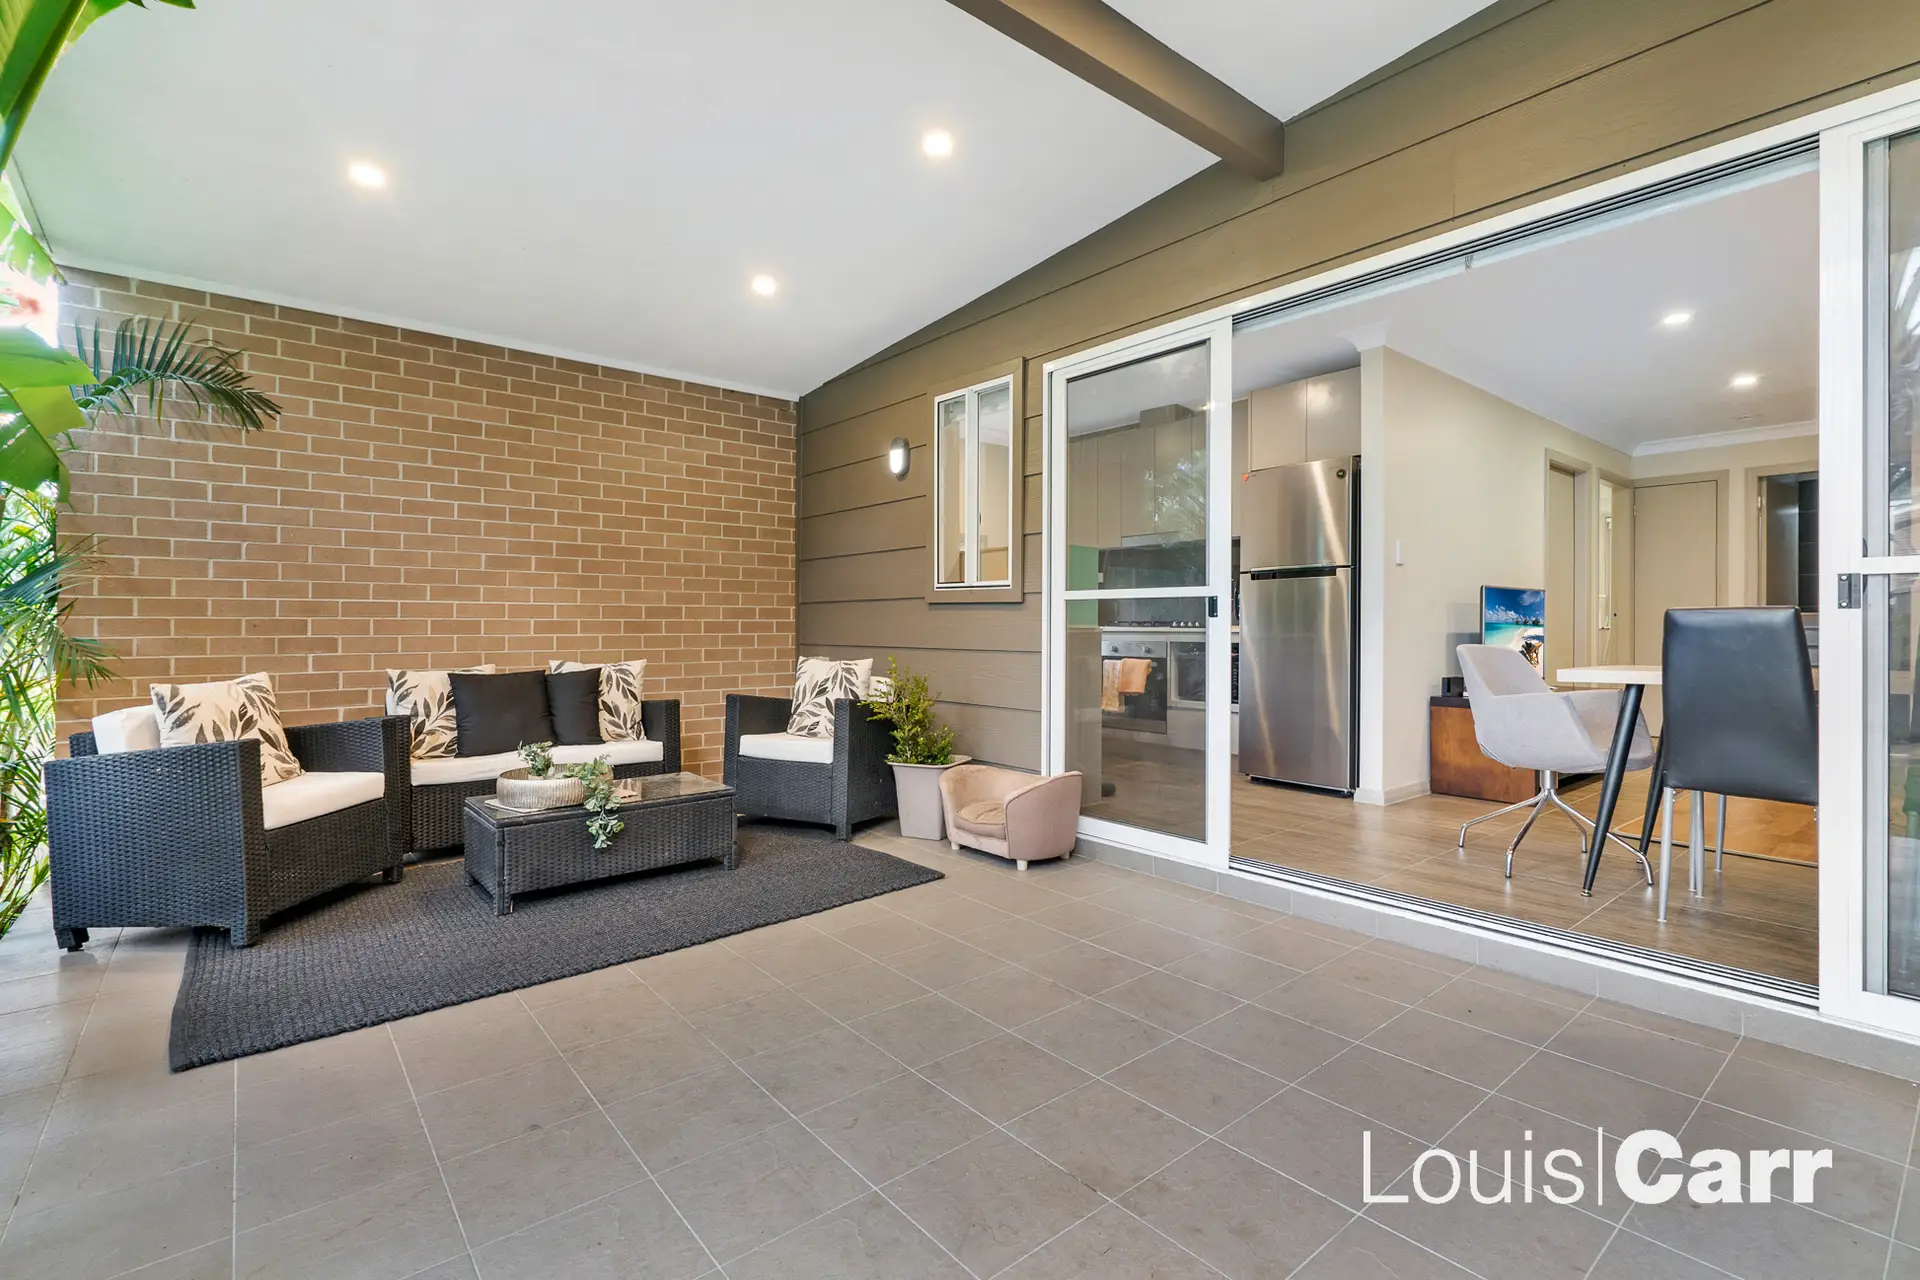 Photo #12: 18 Aiken Road, West Pennant Hills - Sold by Louis Carr Real Estate